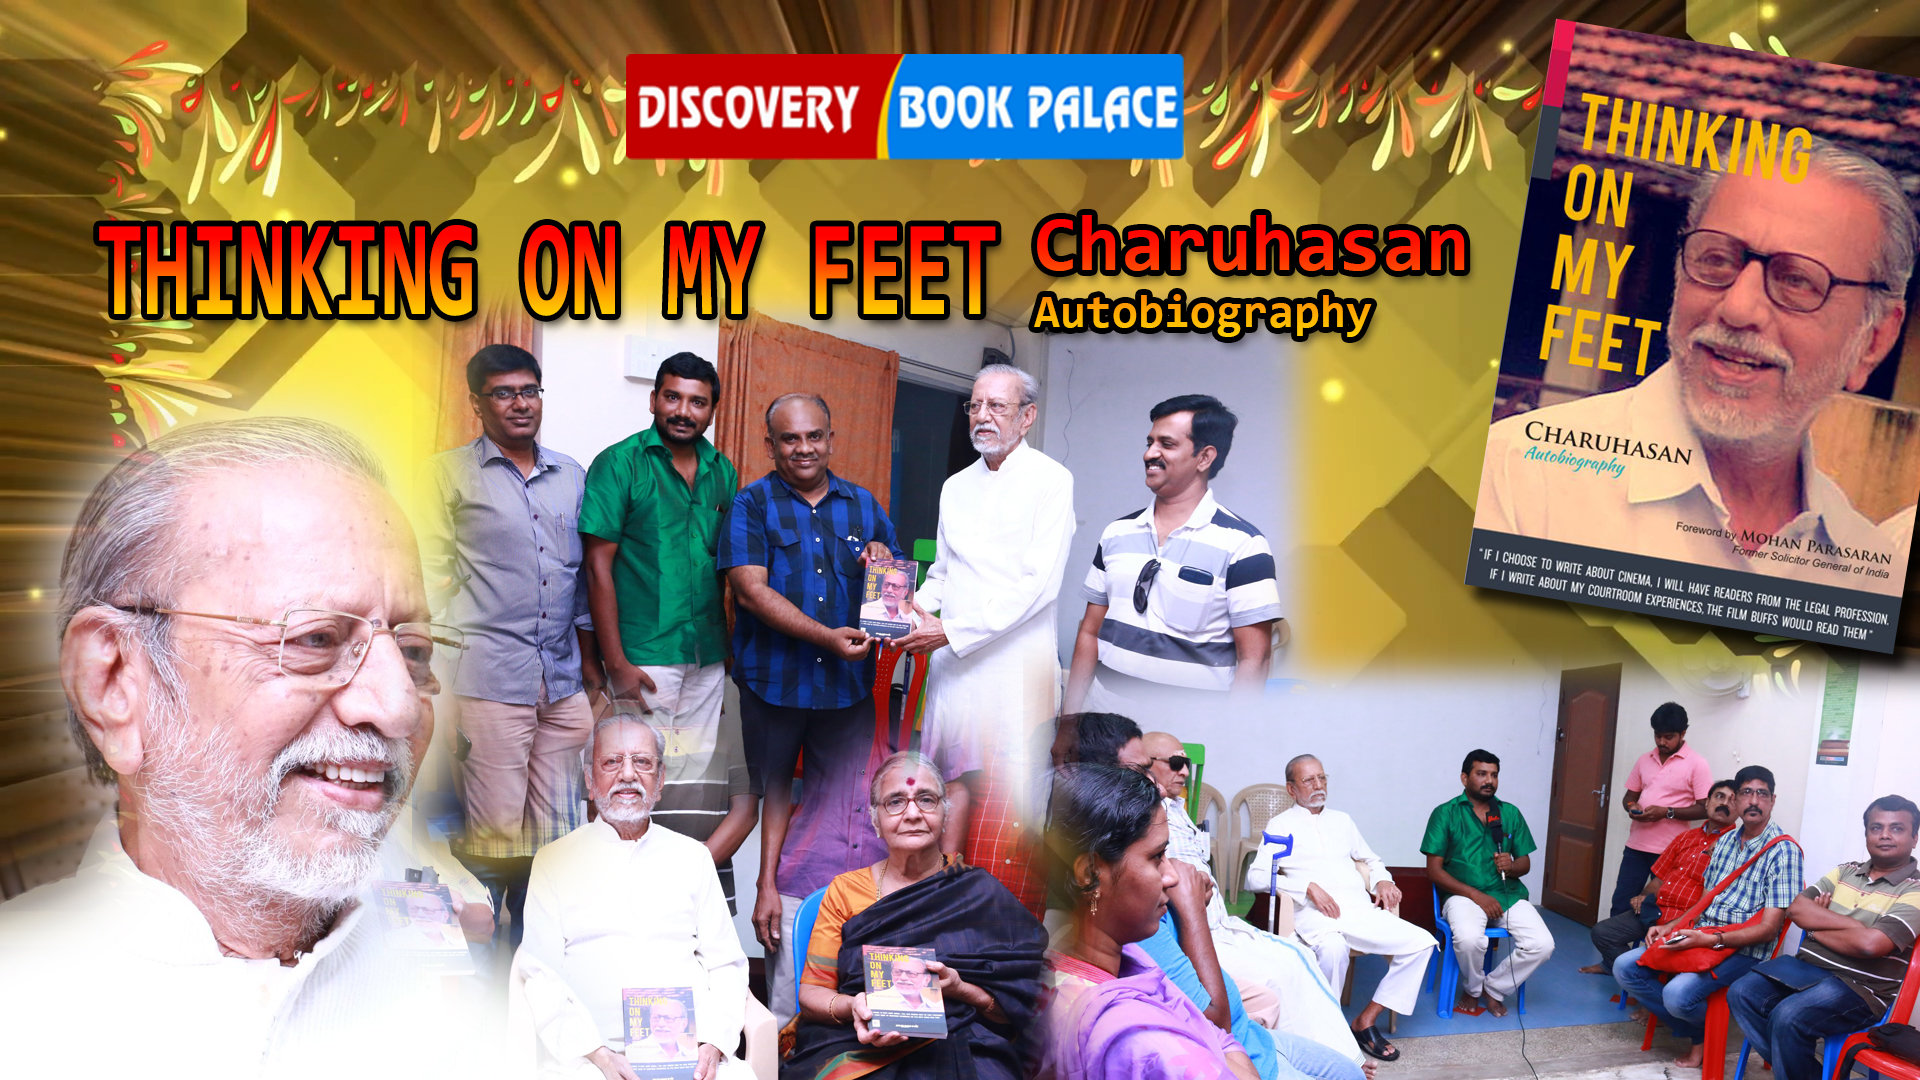 Actor Charuhasan’s ‘THINKING ON MY FEET’ Book Introduction to FB Friends